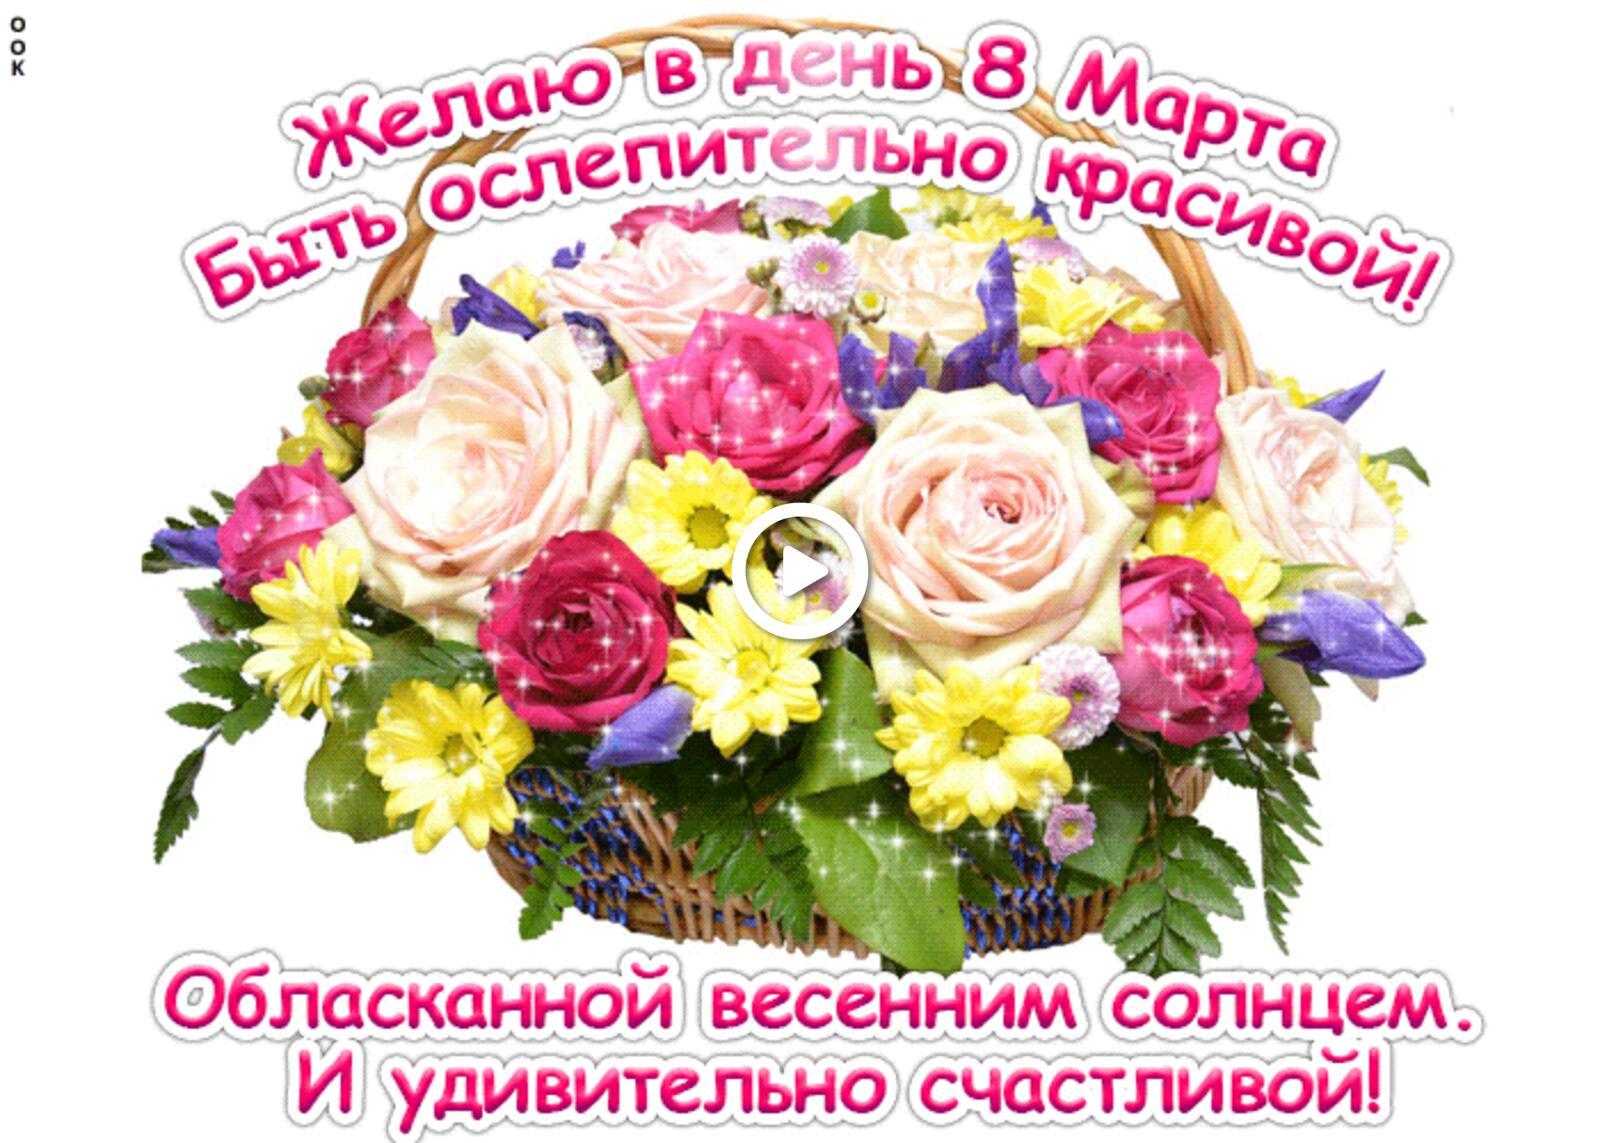 A postcard on the subject of with wishes on march 8 holidays flowers for free